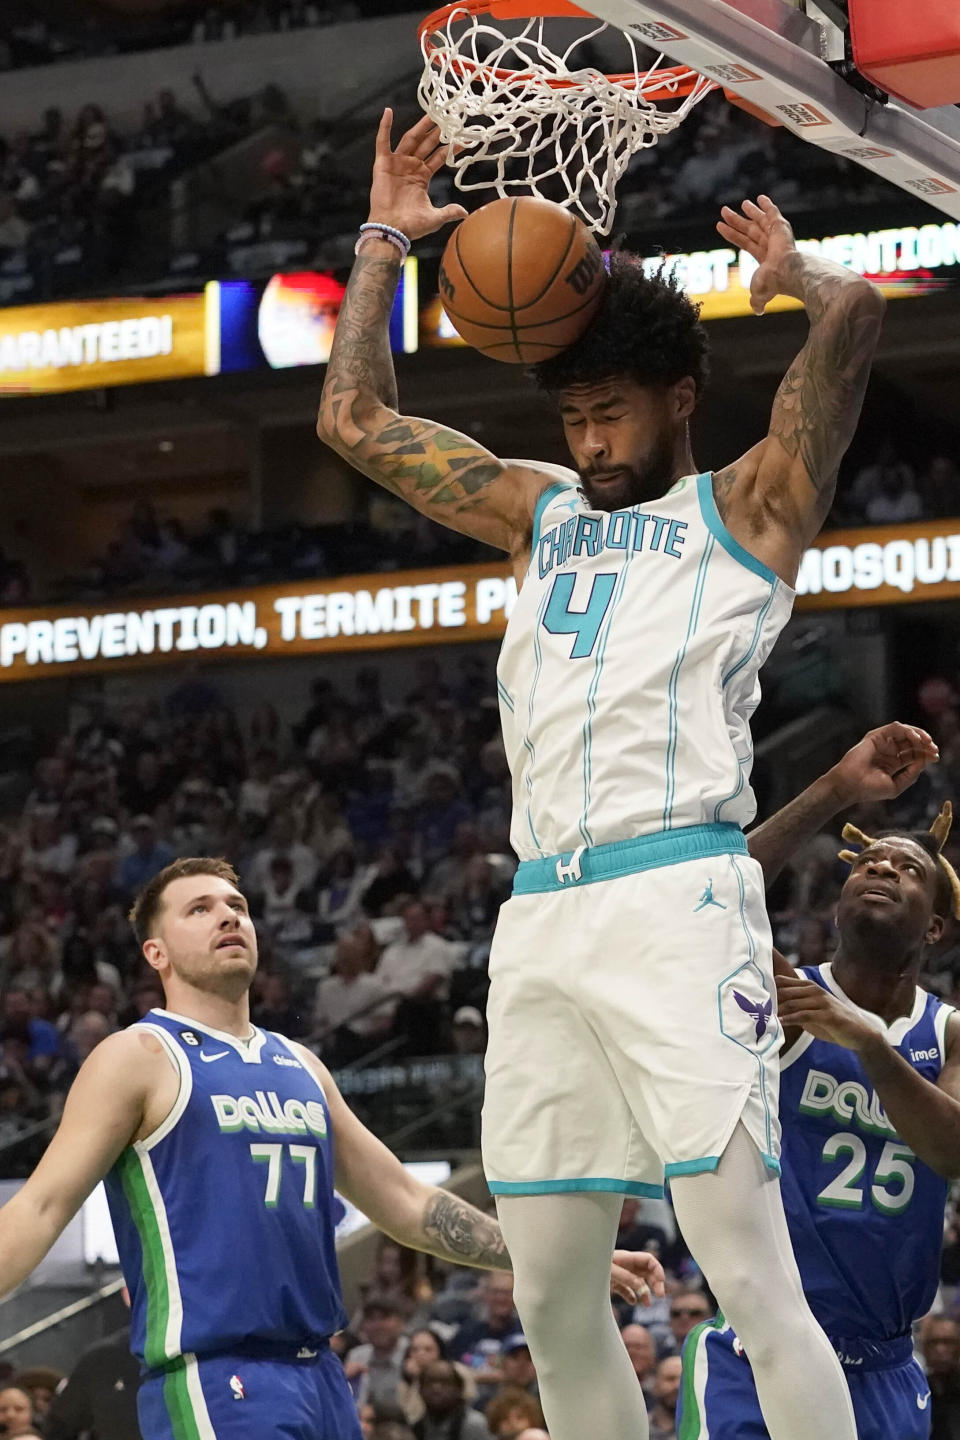 Charlotte Hornets center Nick Richards (4) dunks against Dallas Mavericks defenders Luka Doncic (77) and Reggie Bullock (25) during the first quarter of an NBA basketball game in Dallas, Friday, March 24, 2023. (AP Photo/LM Otero)